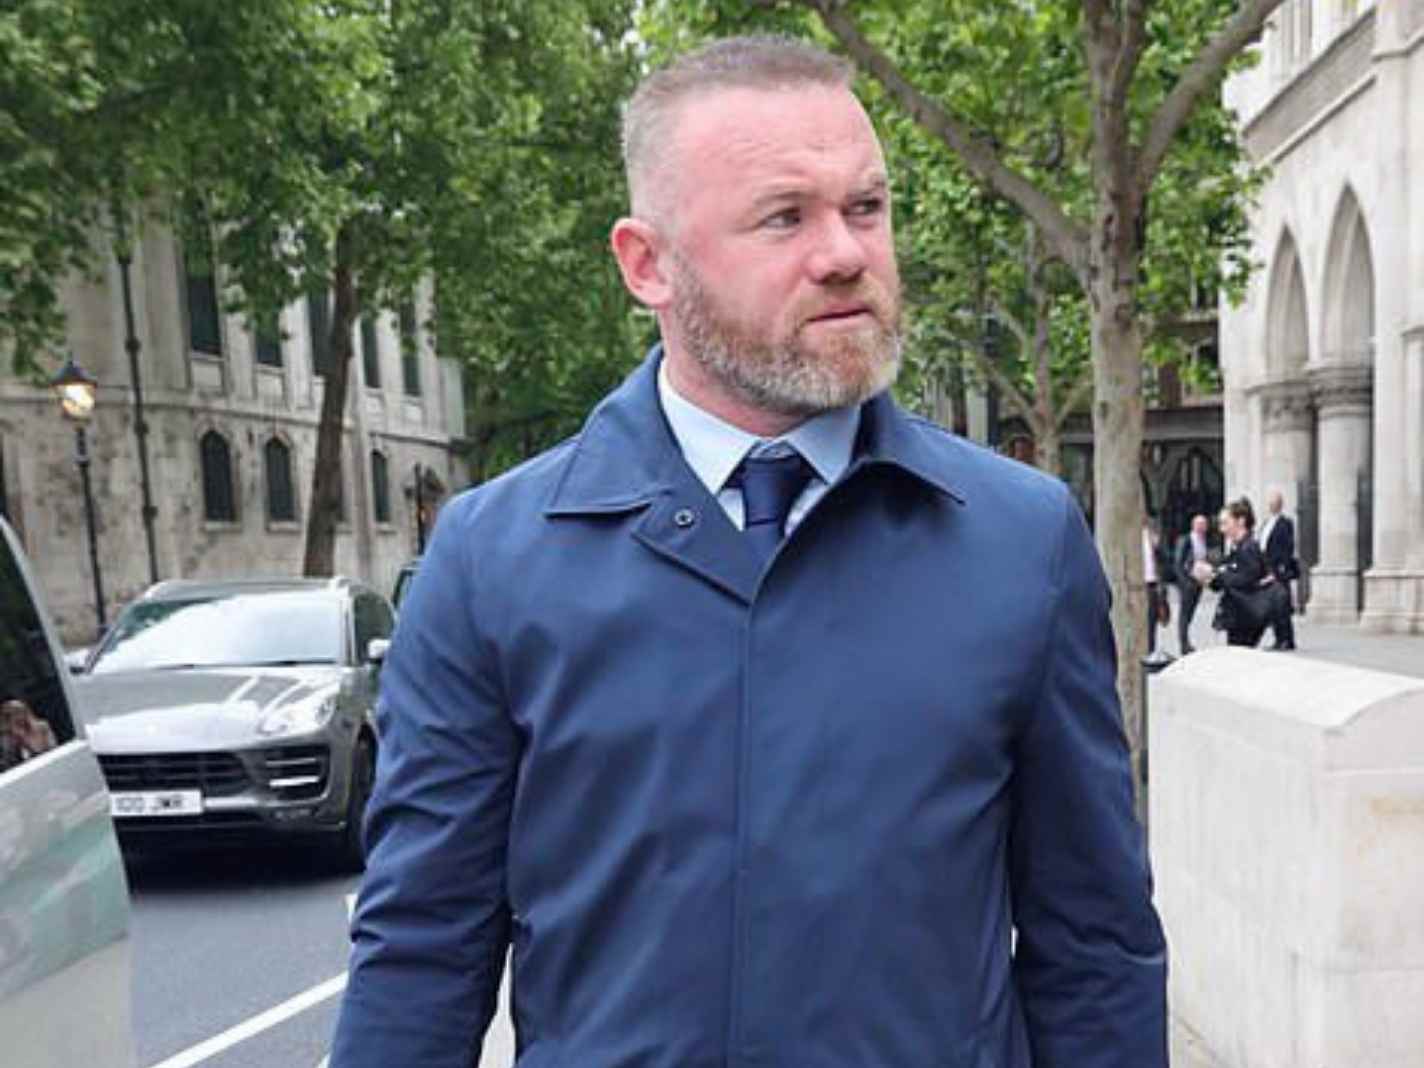 Problem Solver For The Mob: Wayne Rooney impresses Twitter with slick look for court